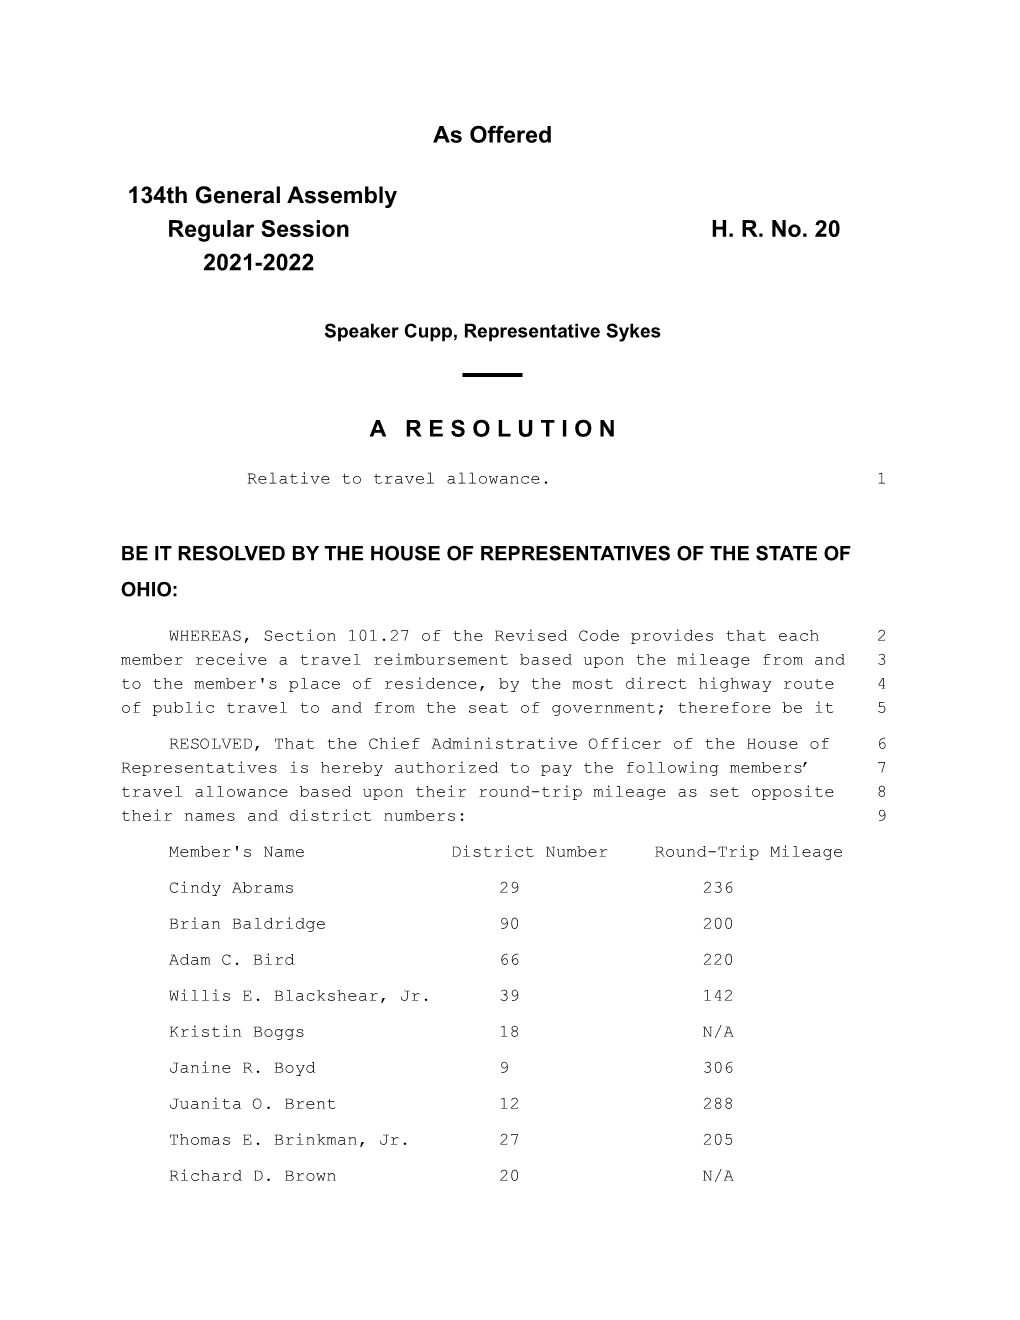 As Offered 134Th General Assembly Regular Session H. R. No. 20 2021